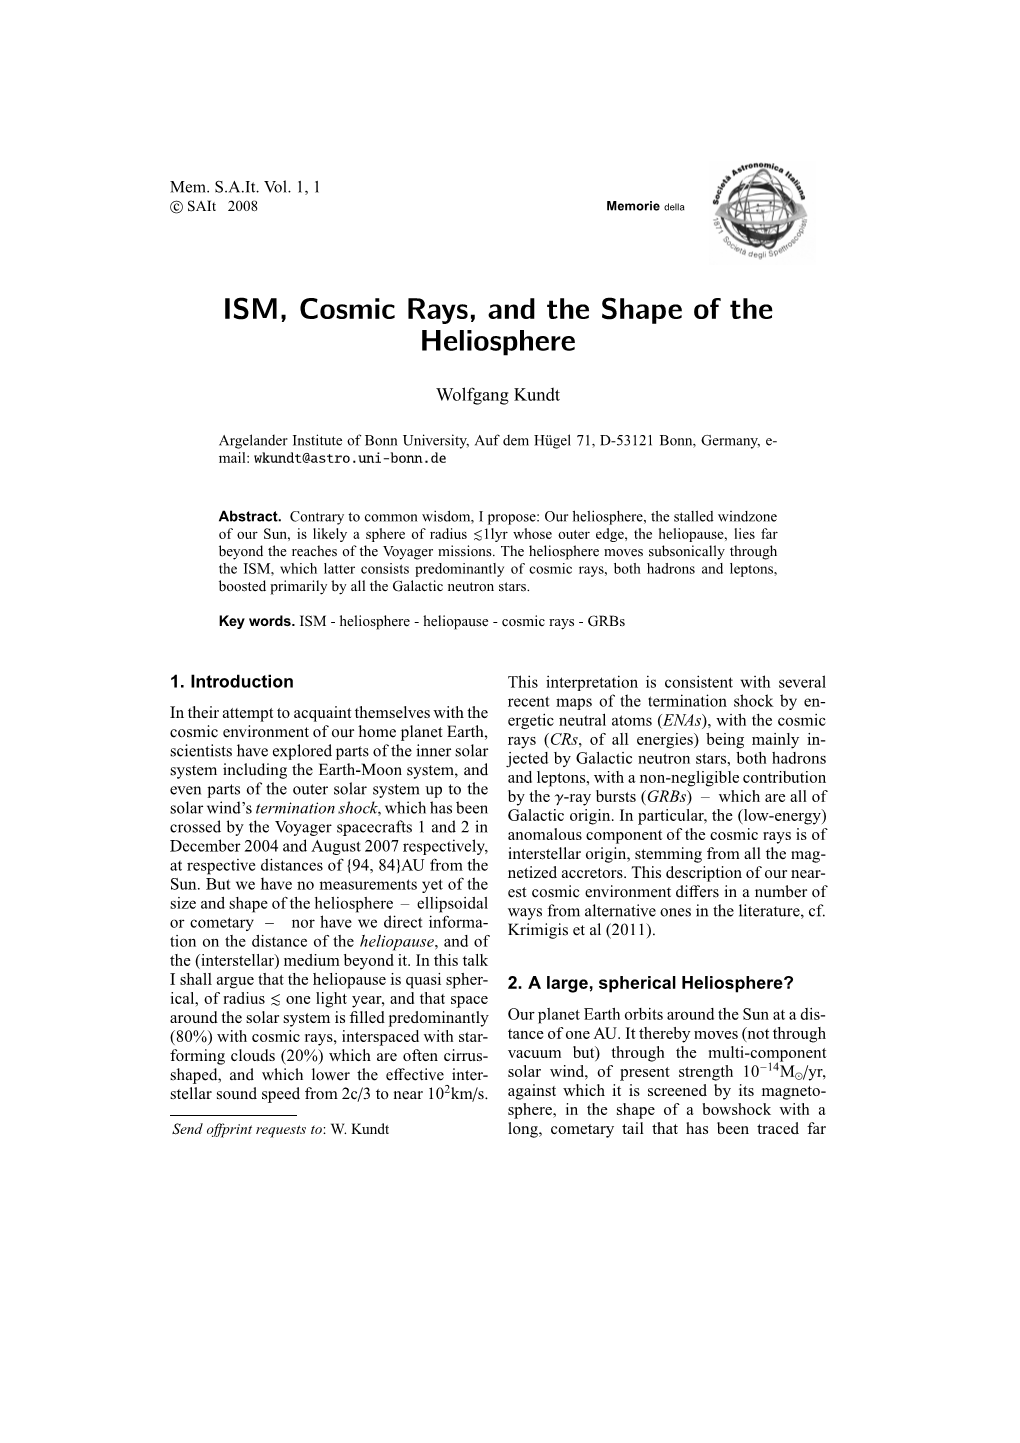 ISM, Cosmic Rays, and the Shape of the Heliosphere